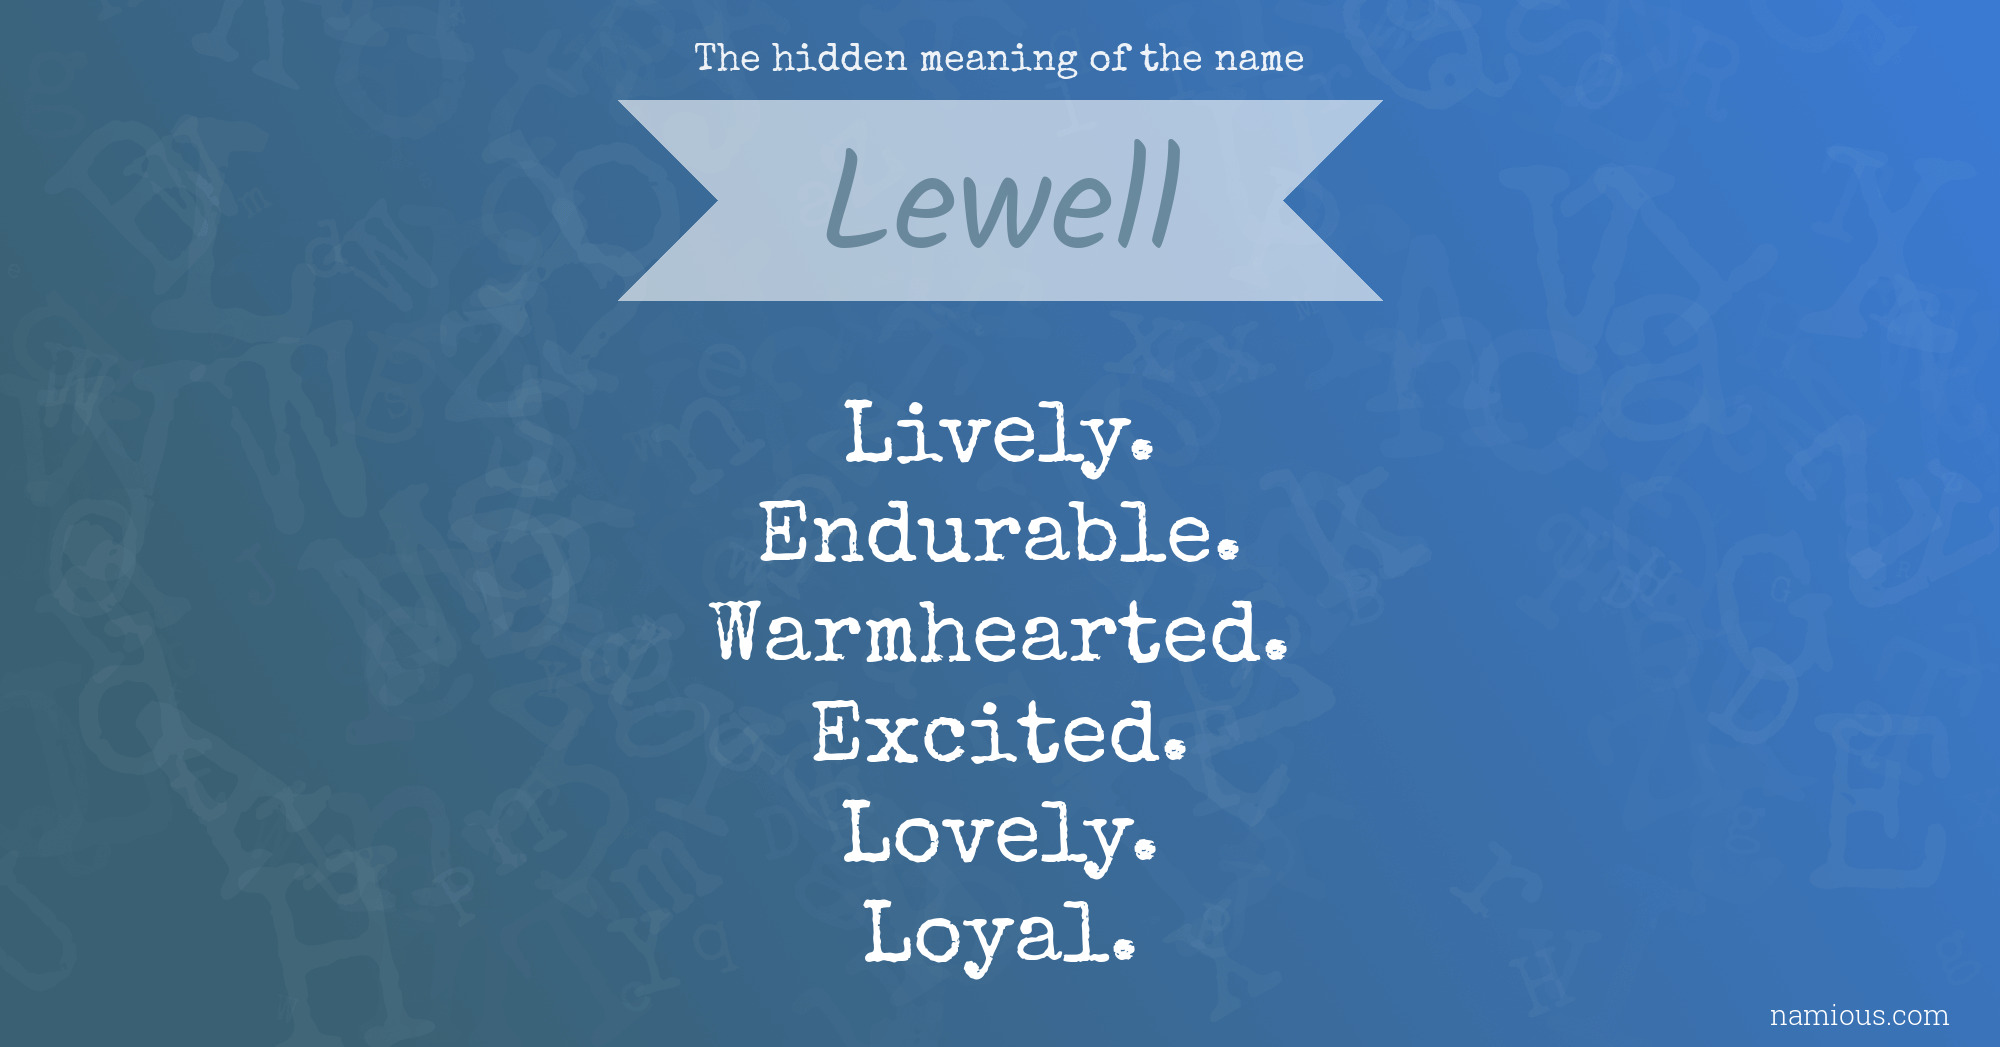 The hidden meaning of the name Lewell